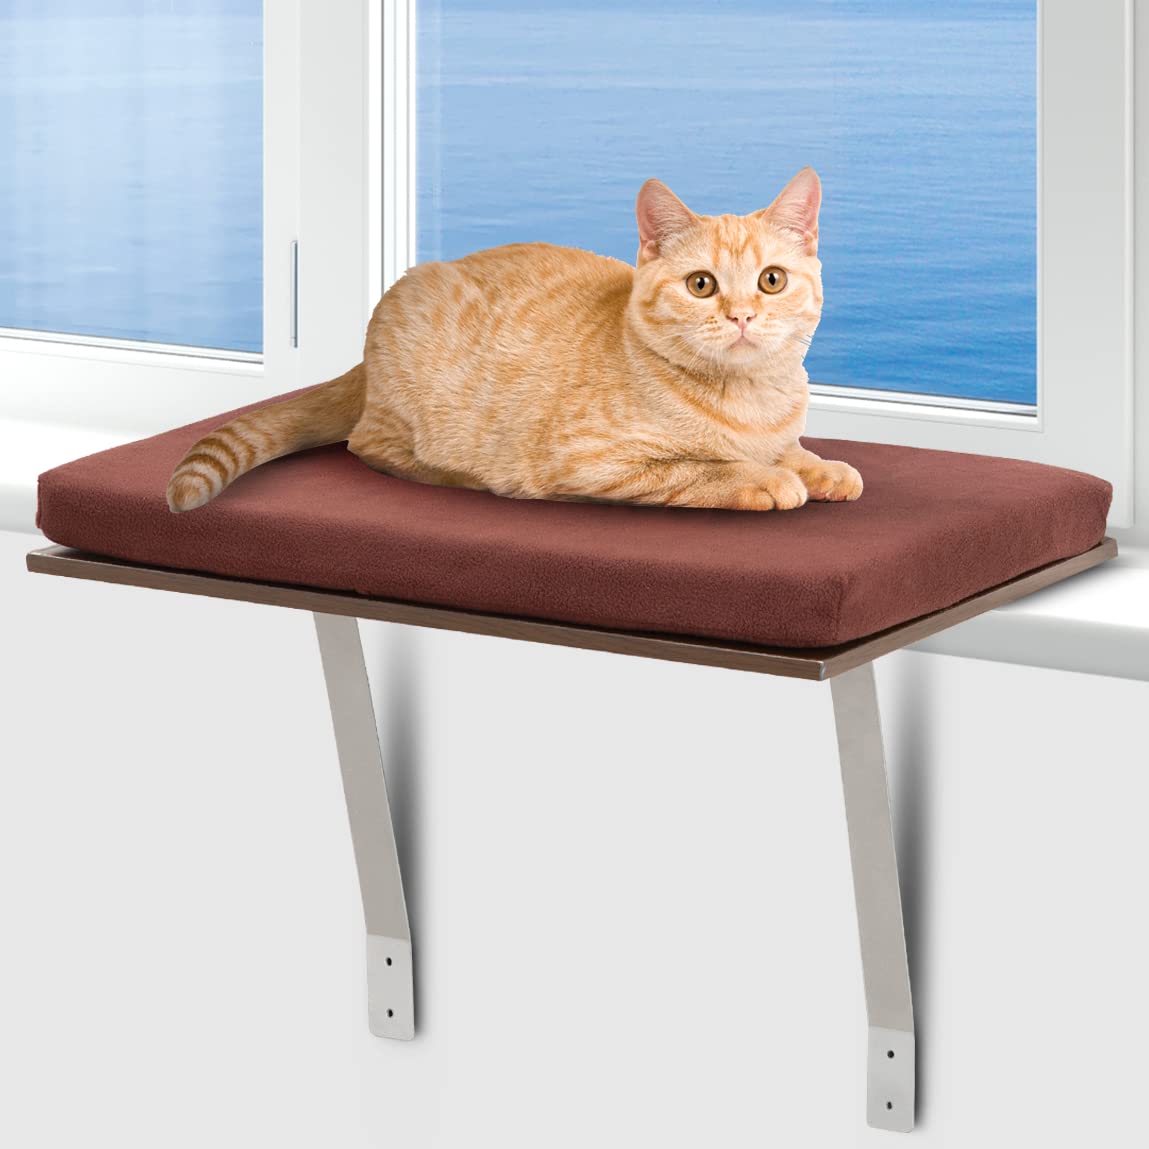 Bundaloo Cat Window Perch Seat with Washable Removable Cover (Small - Medium)  - Very Good